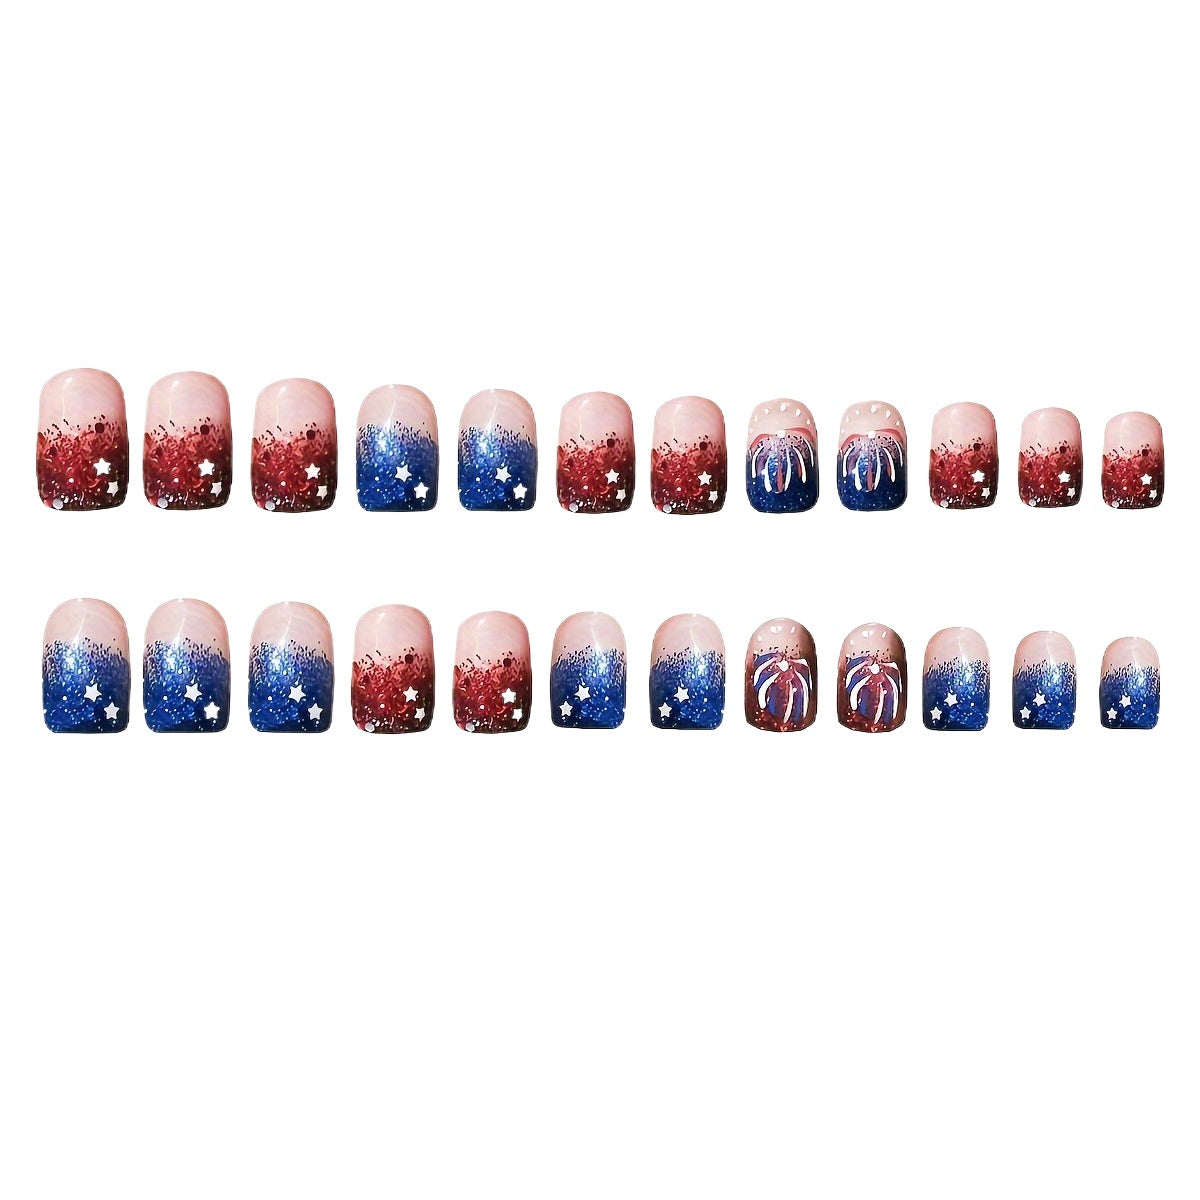 96-Piece Independence Day Press-On Nails Set - Red & Blue Stars & Fireworks, Short Square, Glossy Finish, Includes Jelly Adhesive & Nail File